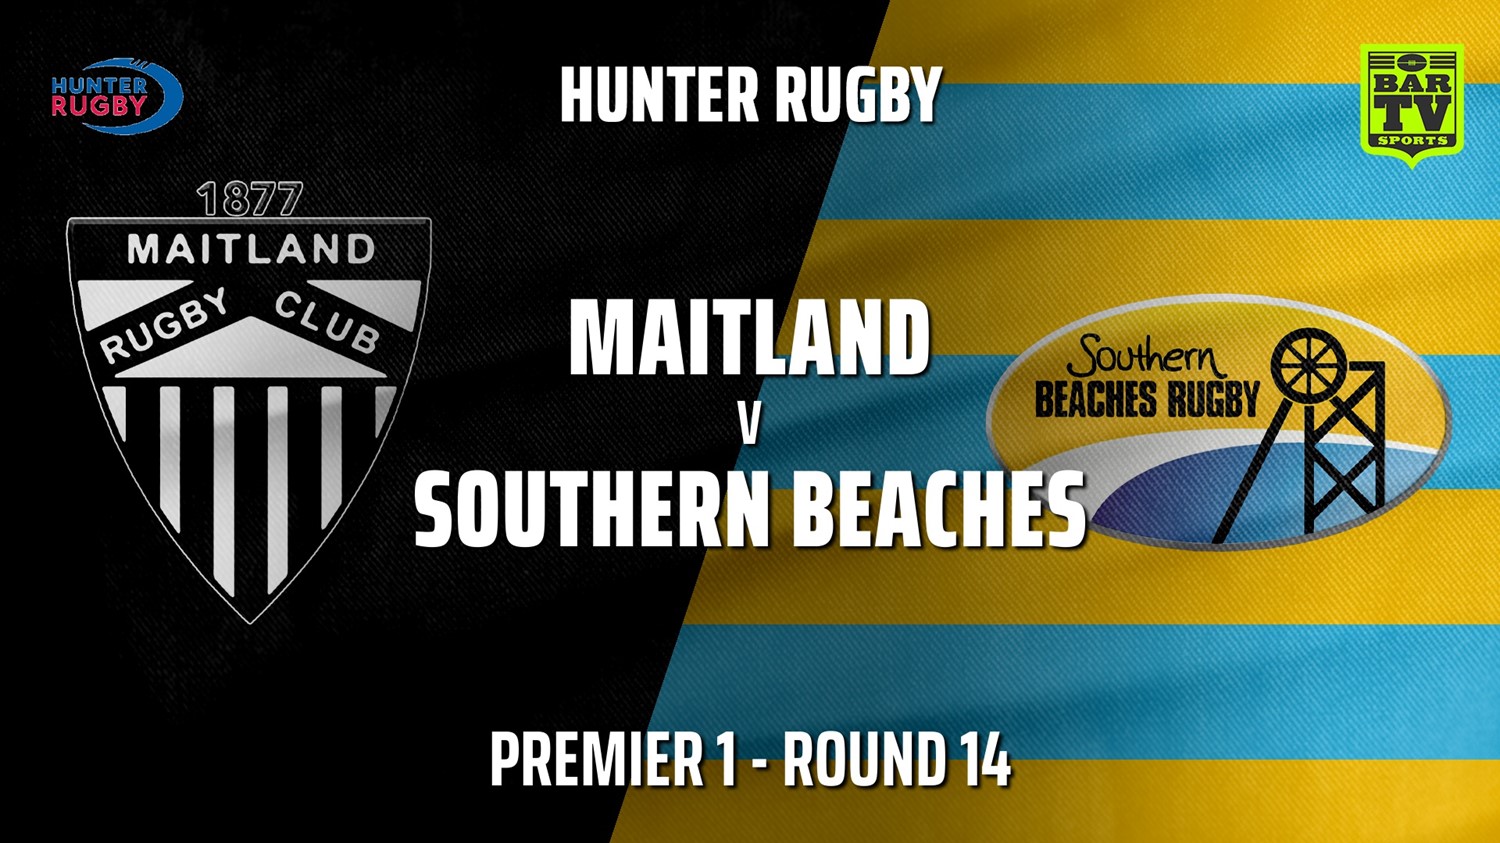 210724-Hunter Rugby Round 14 - Premier 1 - Maitland v Southern Beaches Slate Image